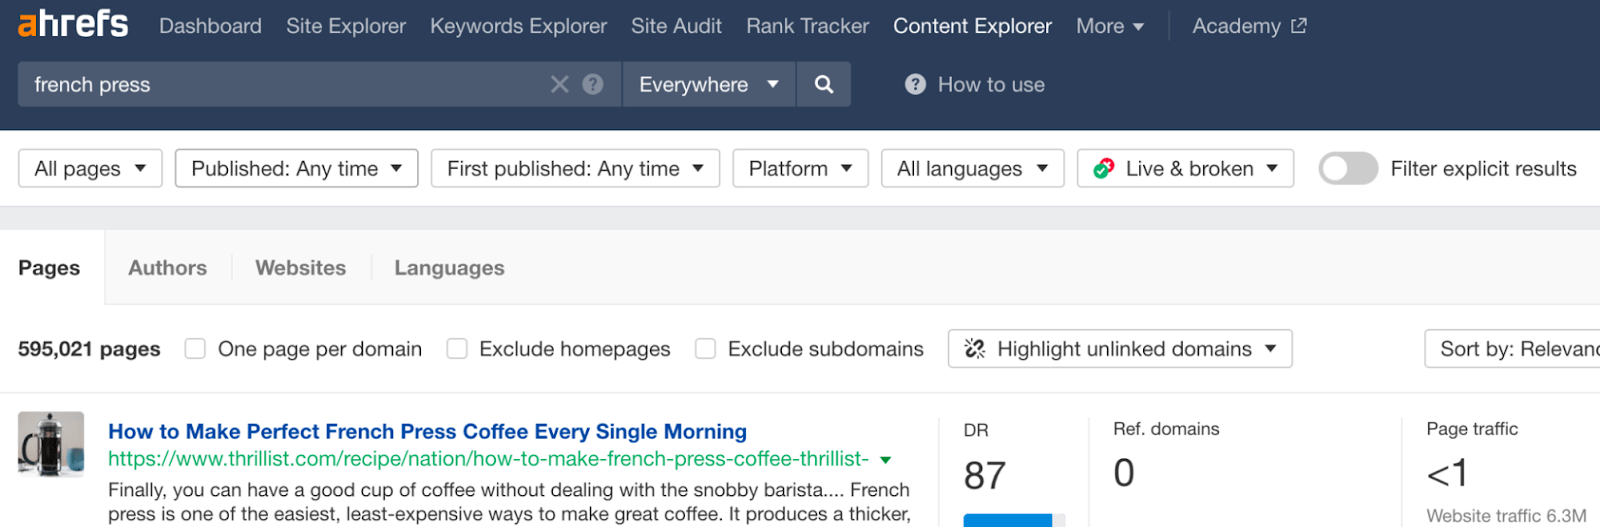 Content Explorer search results for "french press"